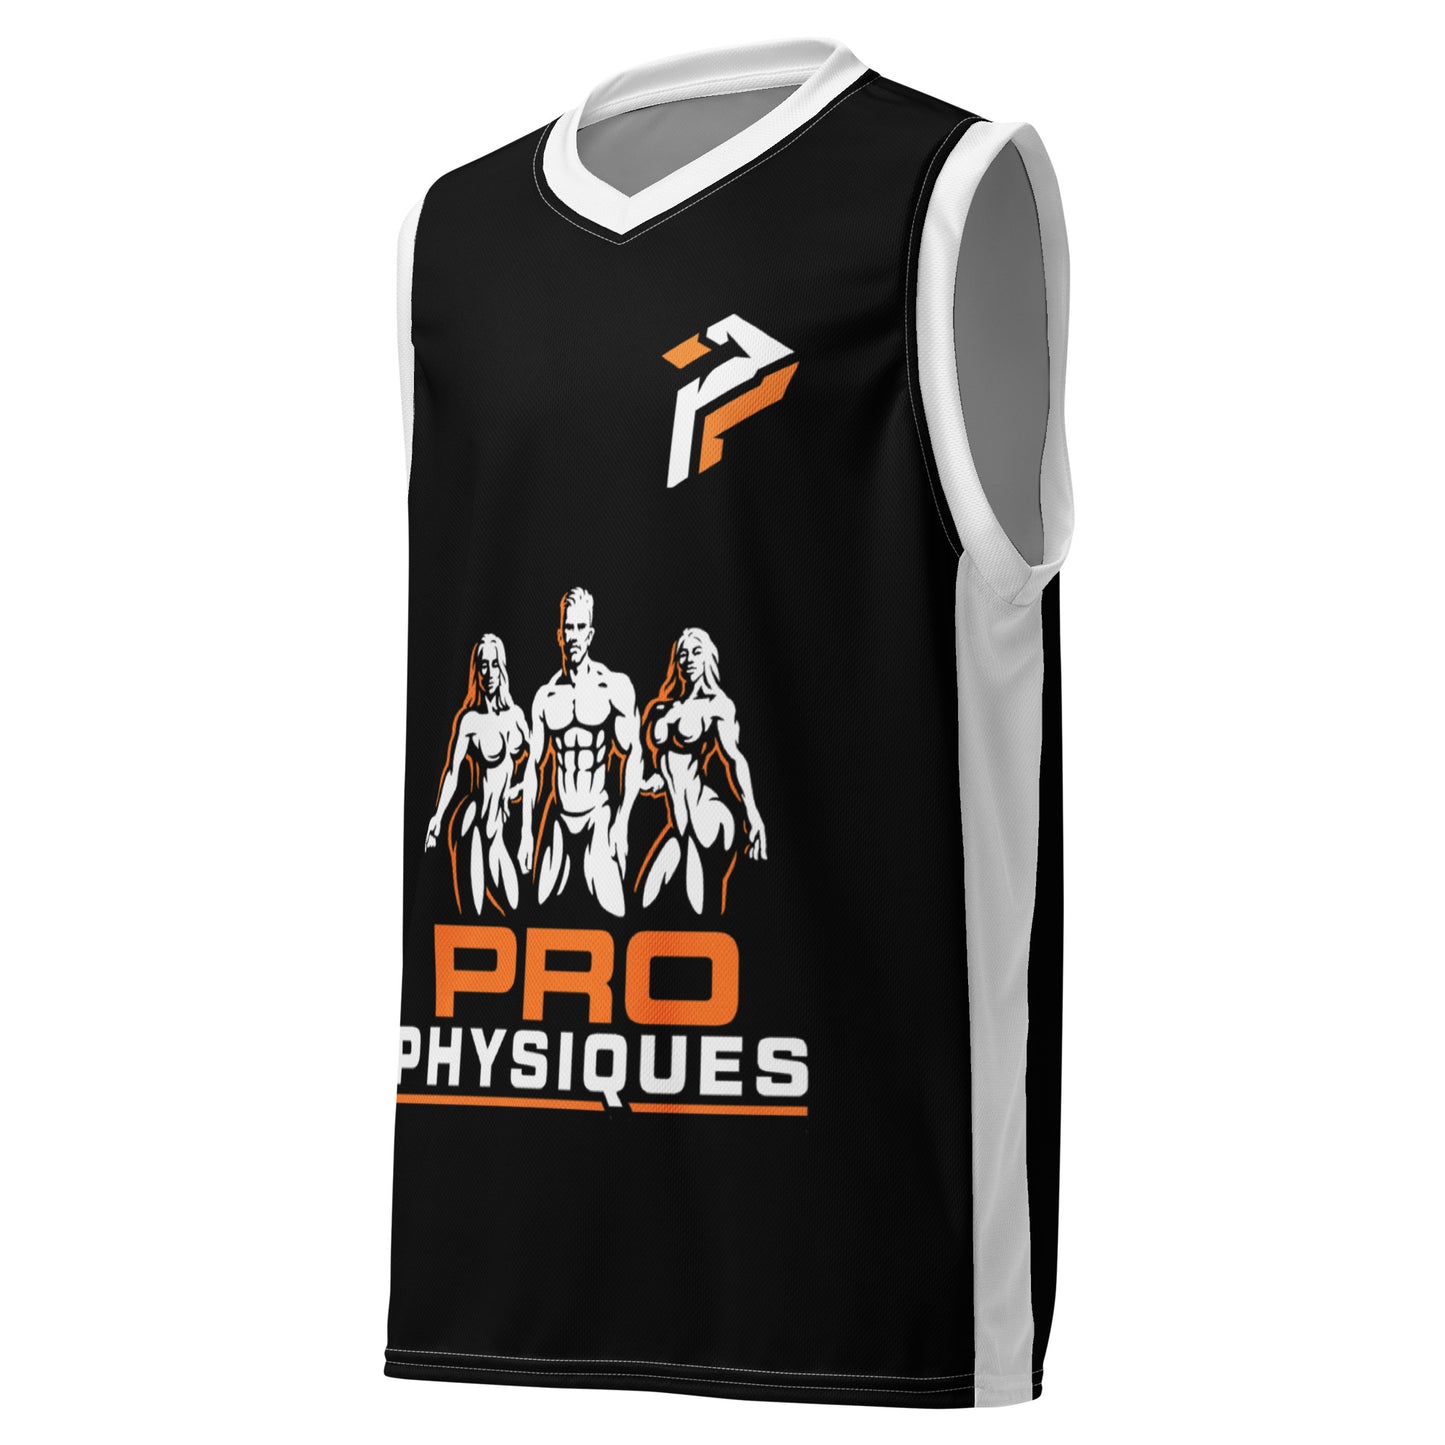 Pro Physiques Essentials Basketball Jersey